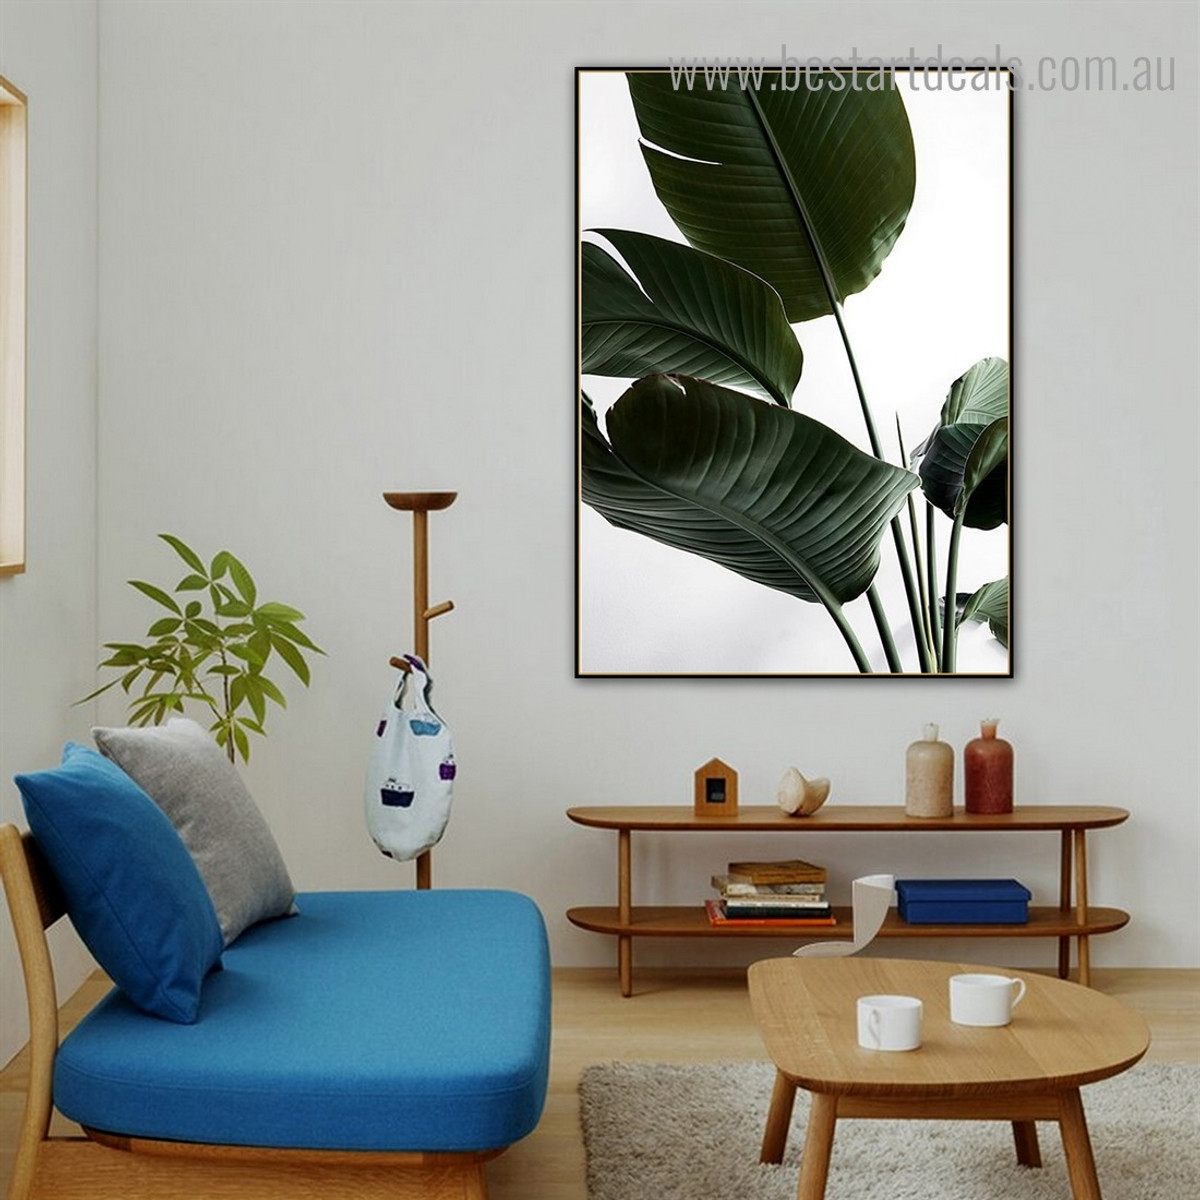 Strelitzia Botanical Contemporary Framed Painting Pic Canvas Print for Room Wall Disposition